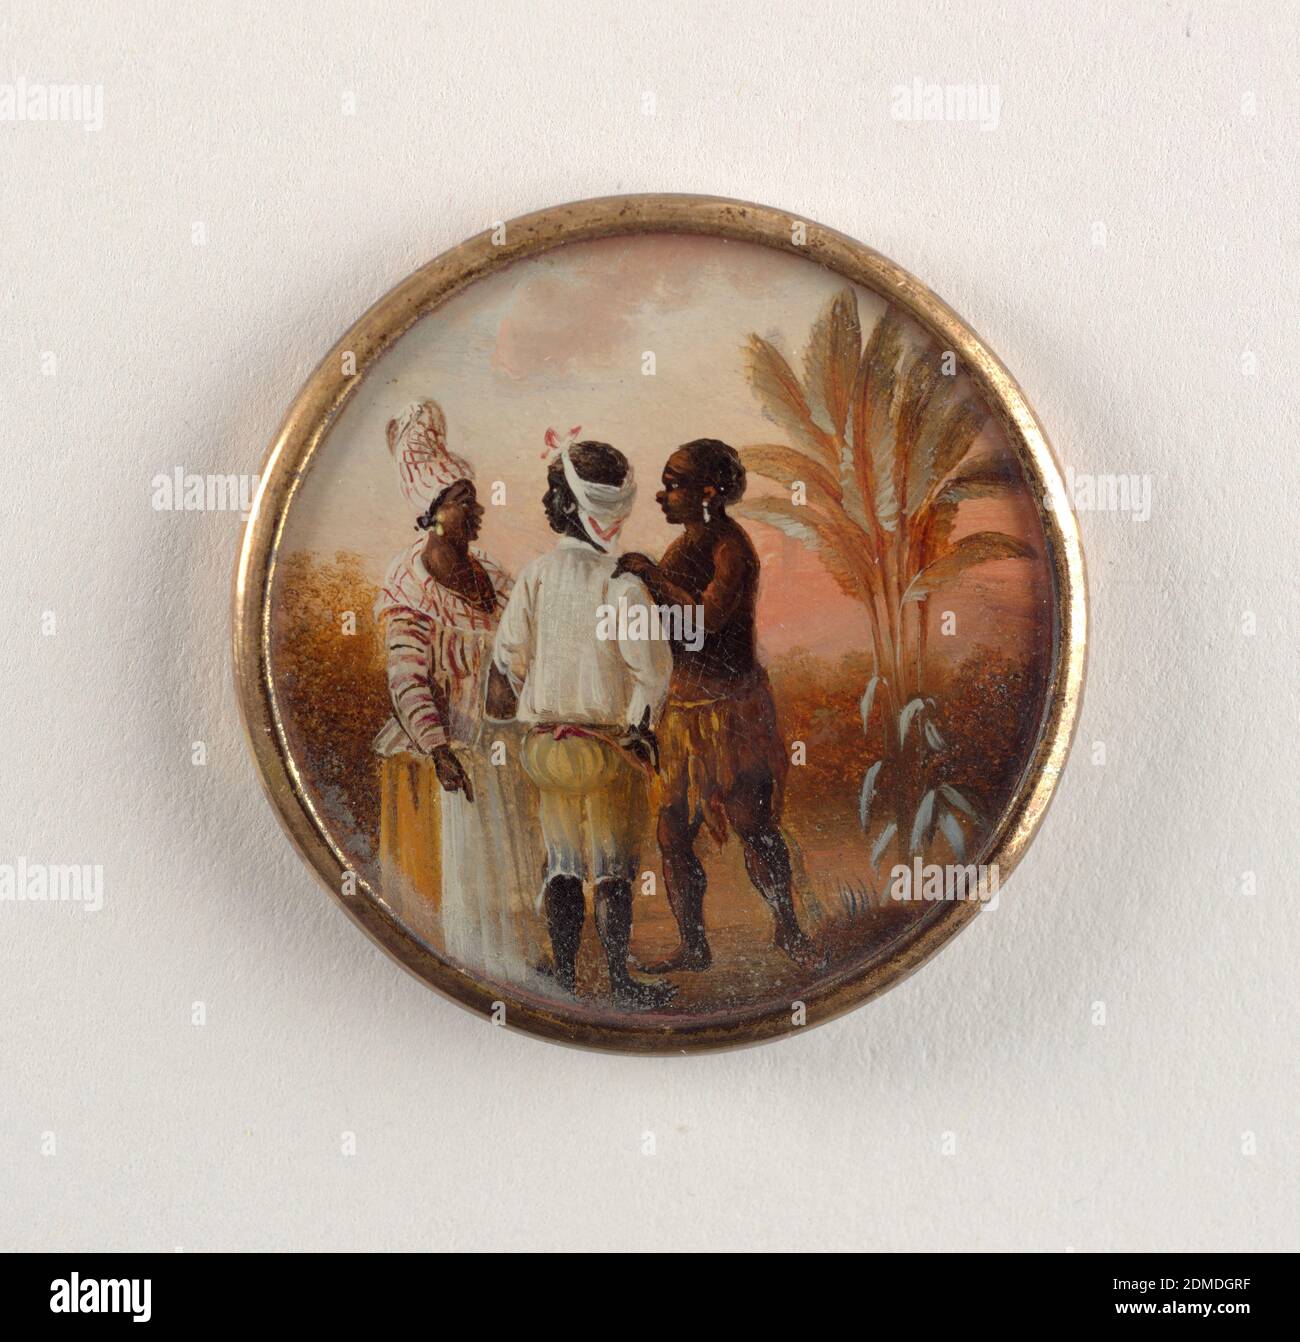 Button, Gouache paint on tin verre fixé, ivory (backing), glass, gilt metal, Button depicting scene of three conversing figures in a landscape with palm trees. A woman dressed in a striped shirt and turban, a man facing the woman with back to viewer in striped pants and white shirt, and a second man wearing native West Indies dress in skirt and headband., late 18th century, costume & accessories, Decorative Arts, Button Stock Photo